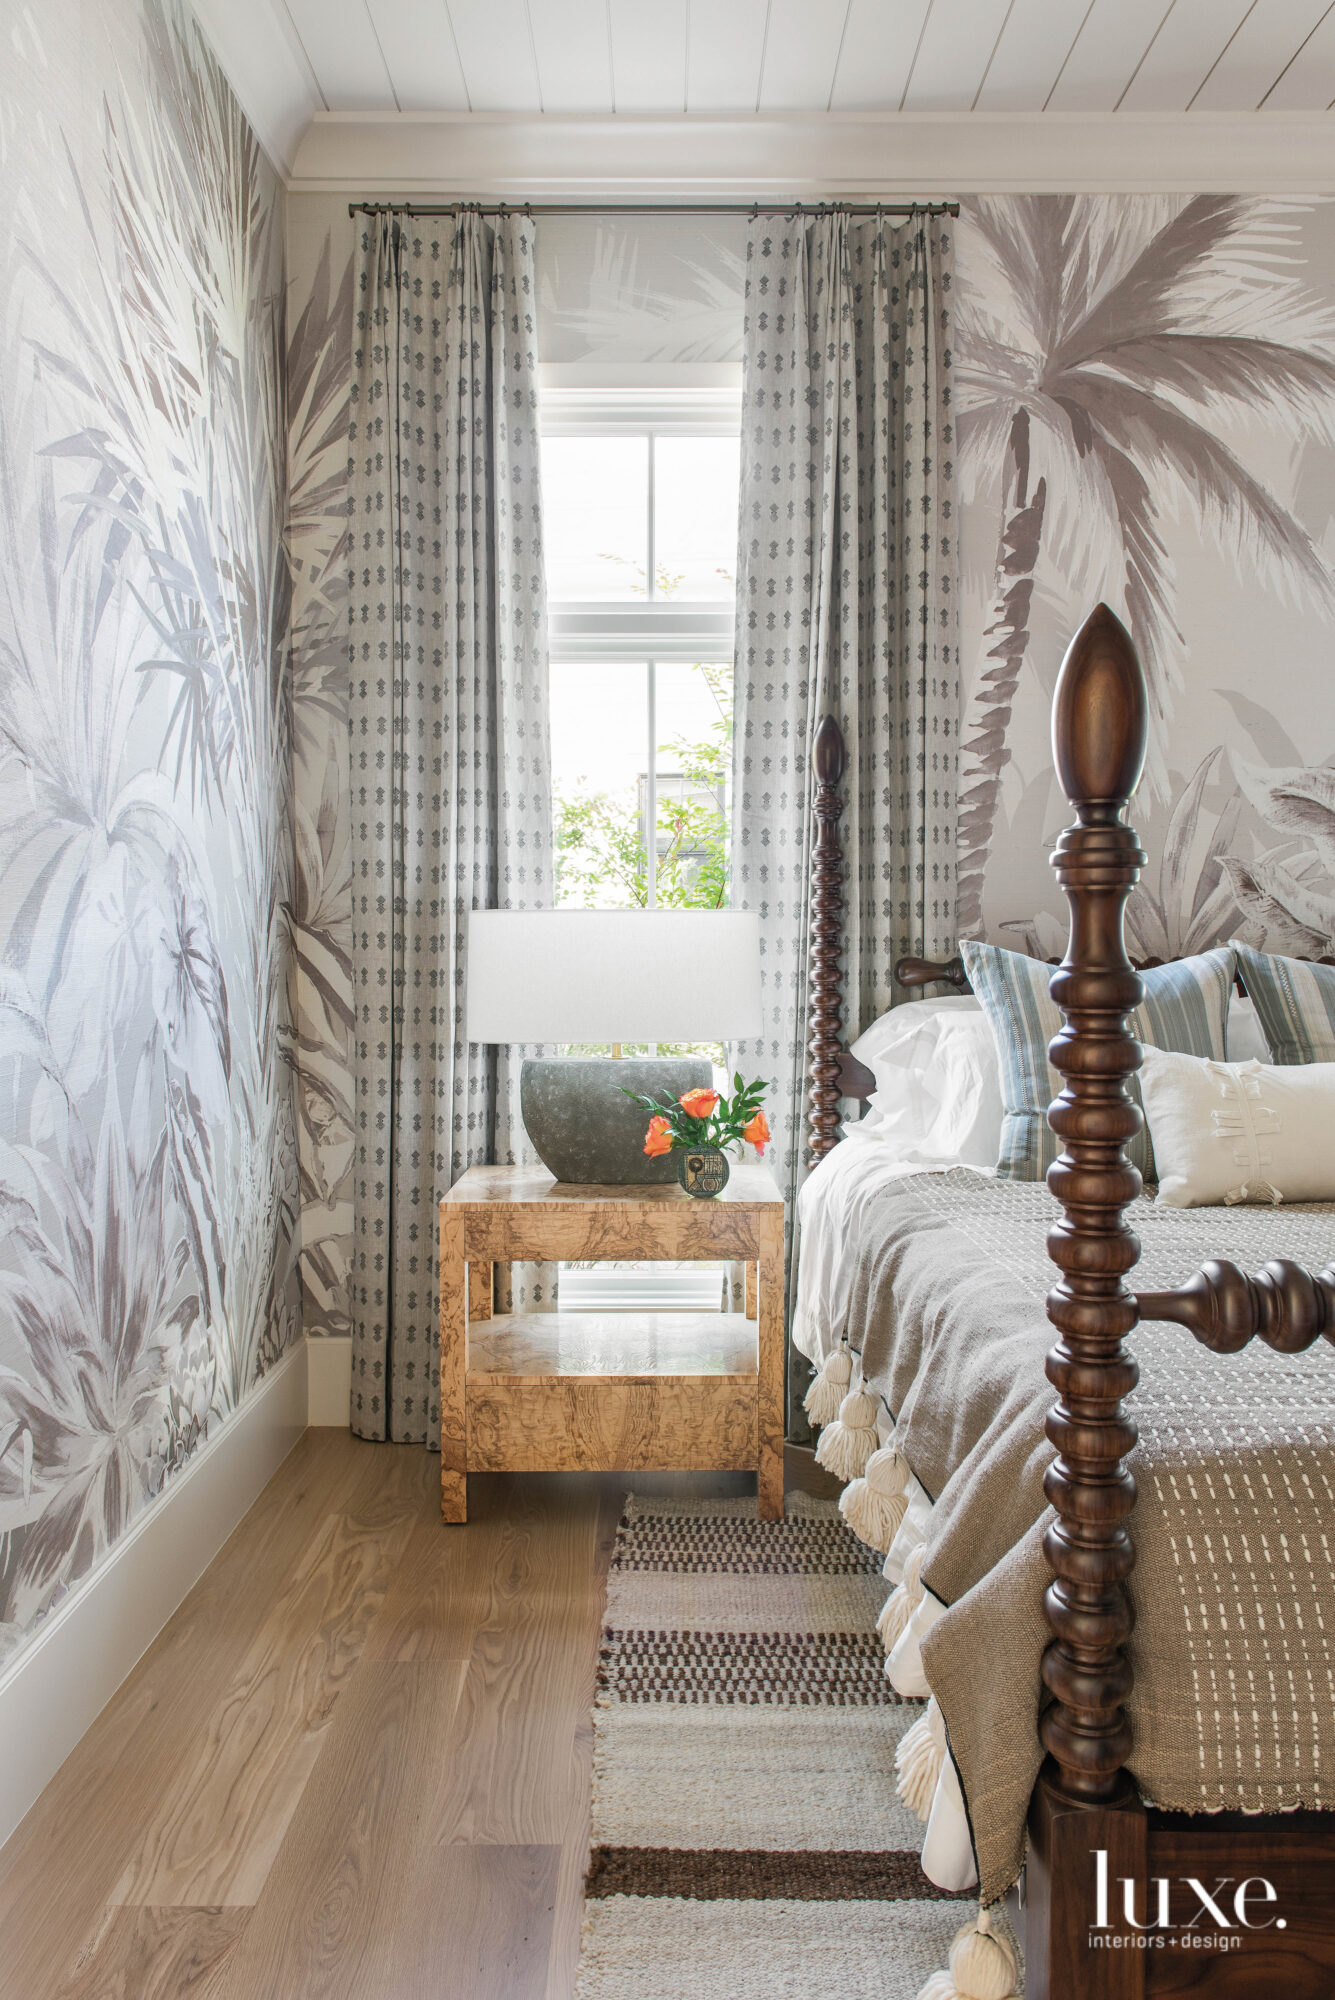 Four-poster bed with tall window and palm-print wall covering